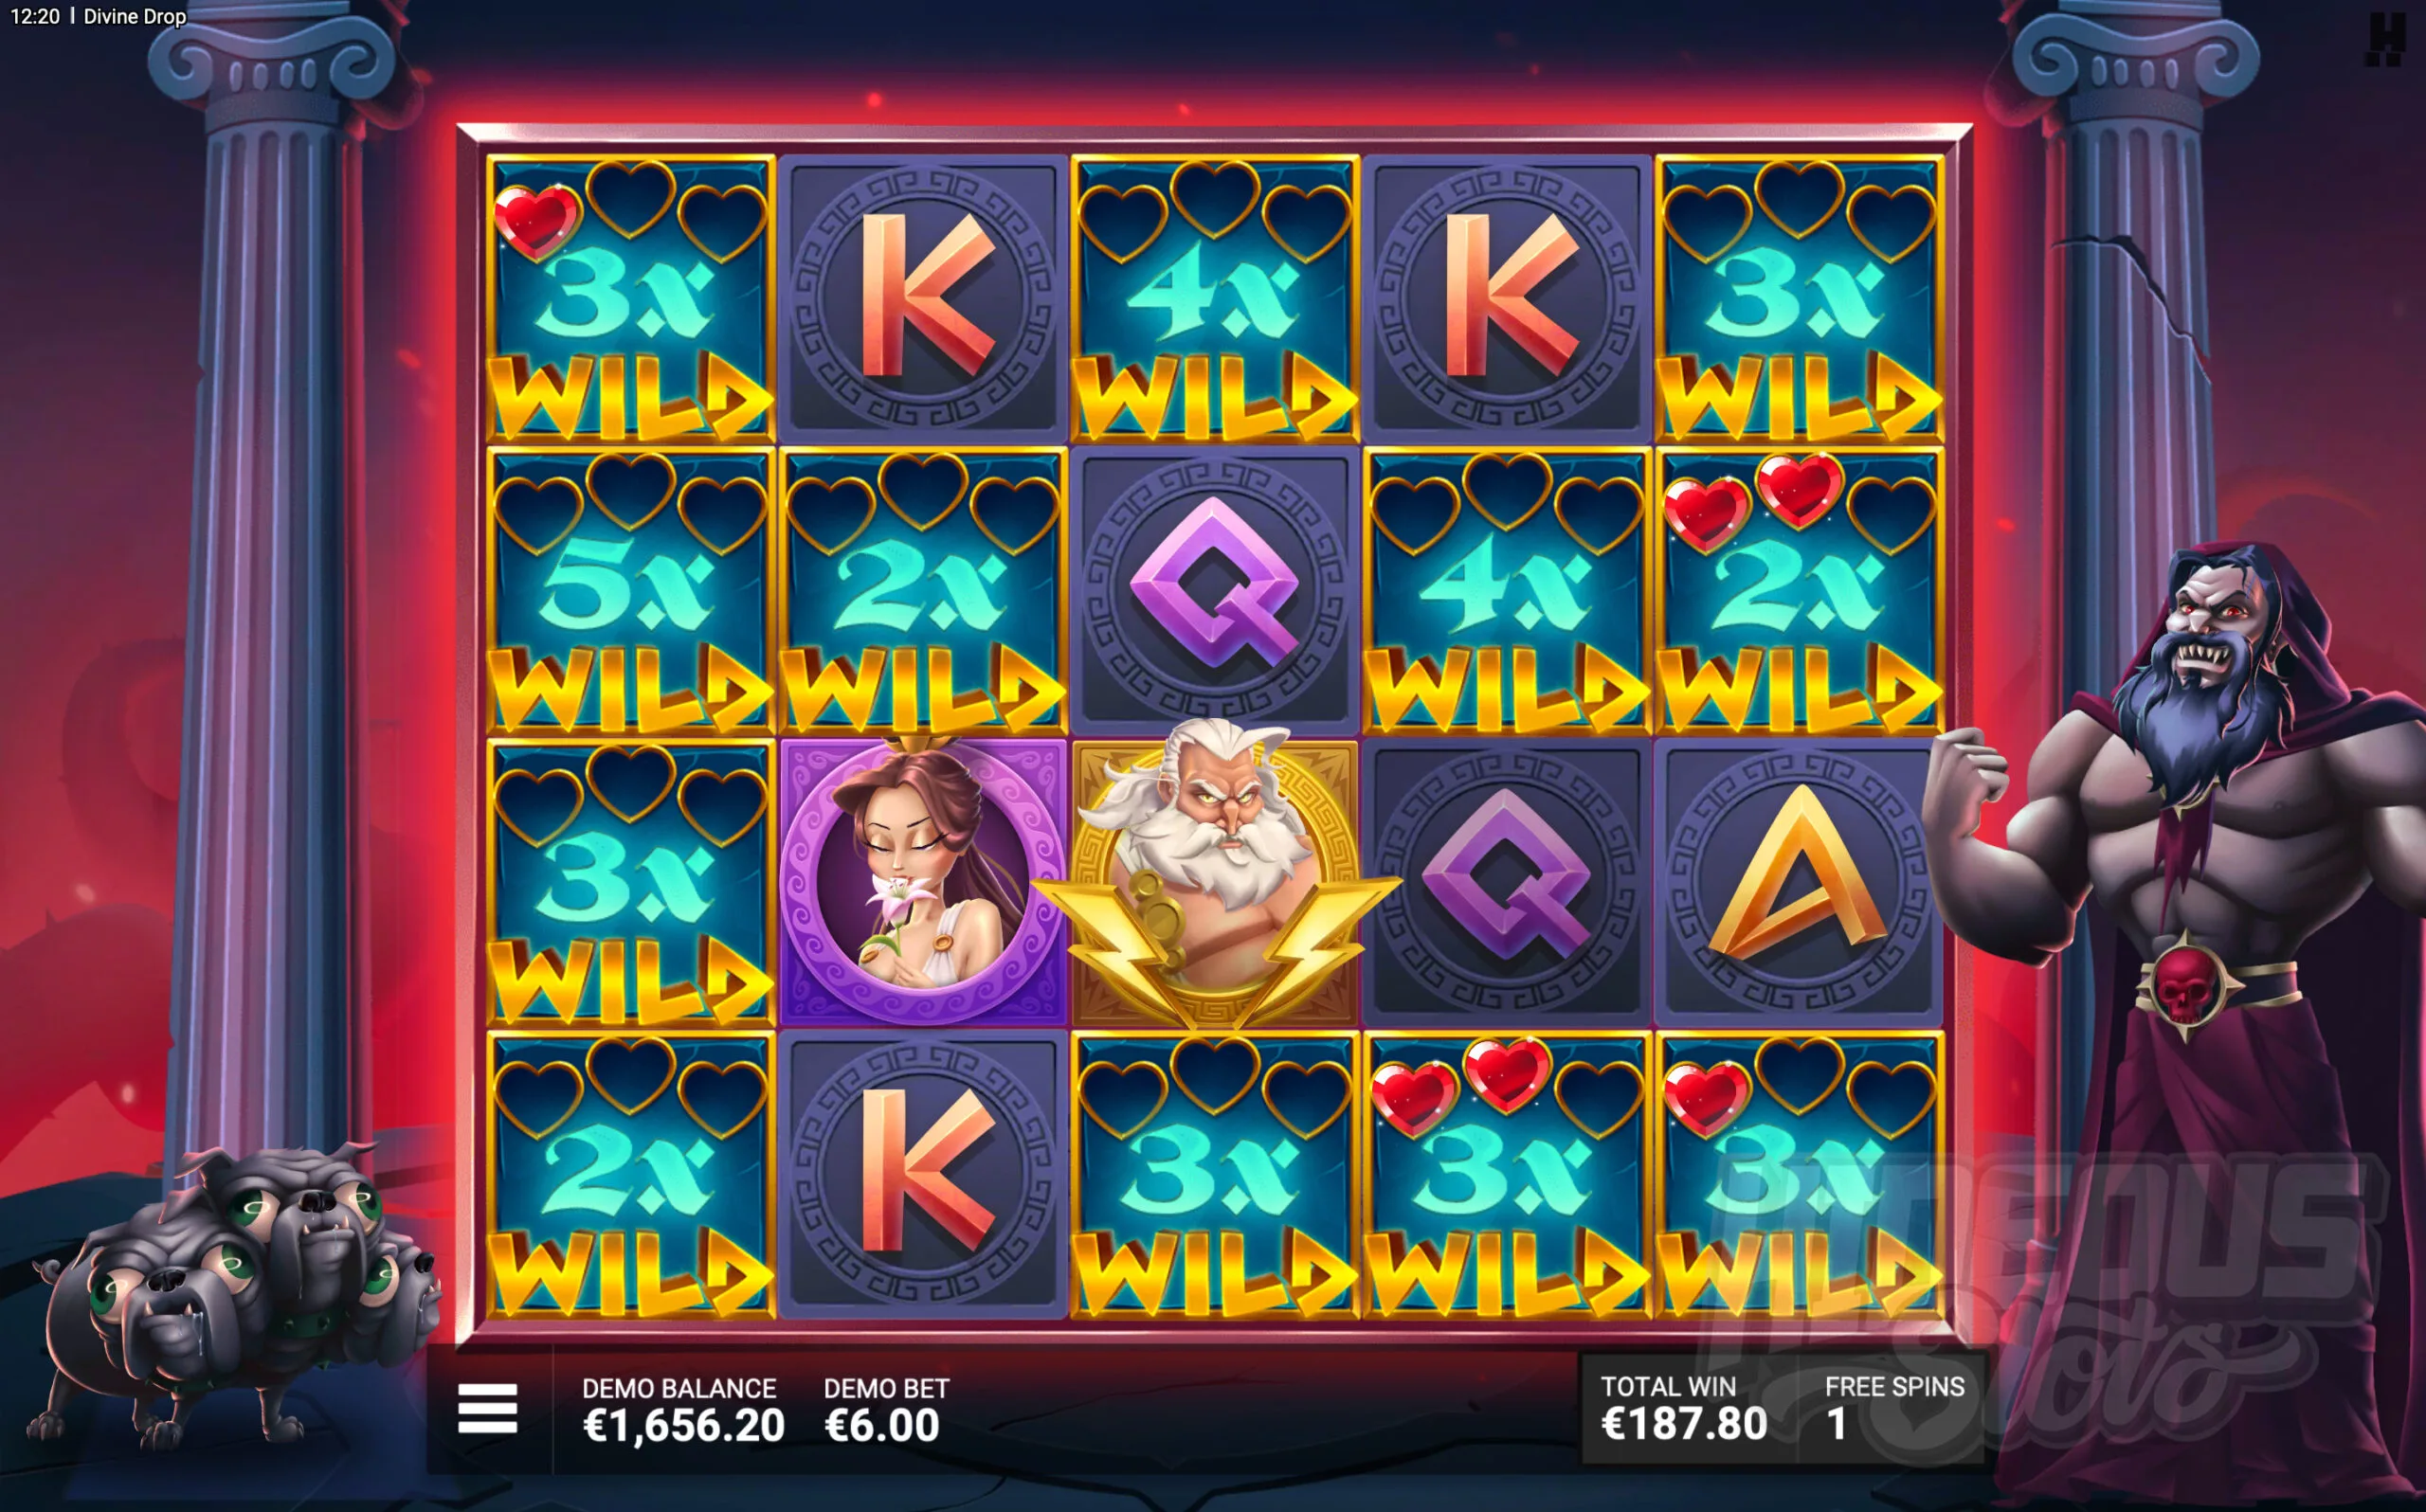 There is an Increased Chance of Landing Wild Multiplier Symbols or Special Symbols During the Bonus